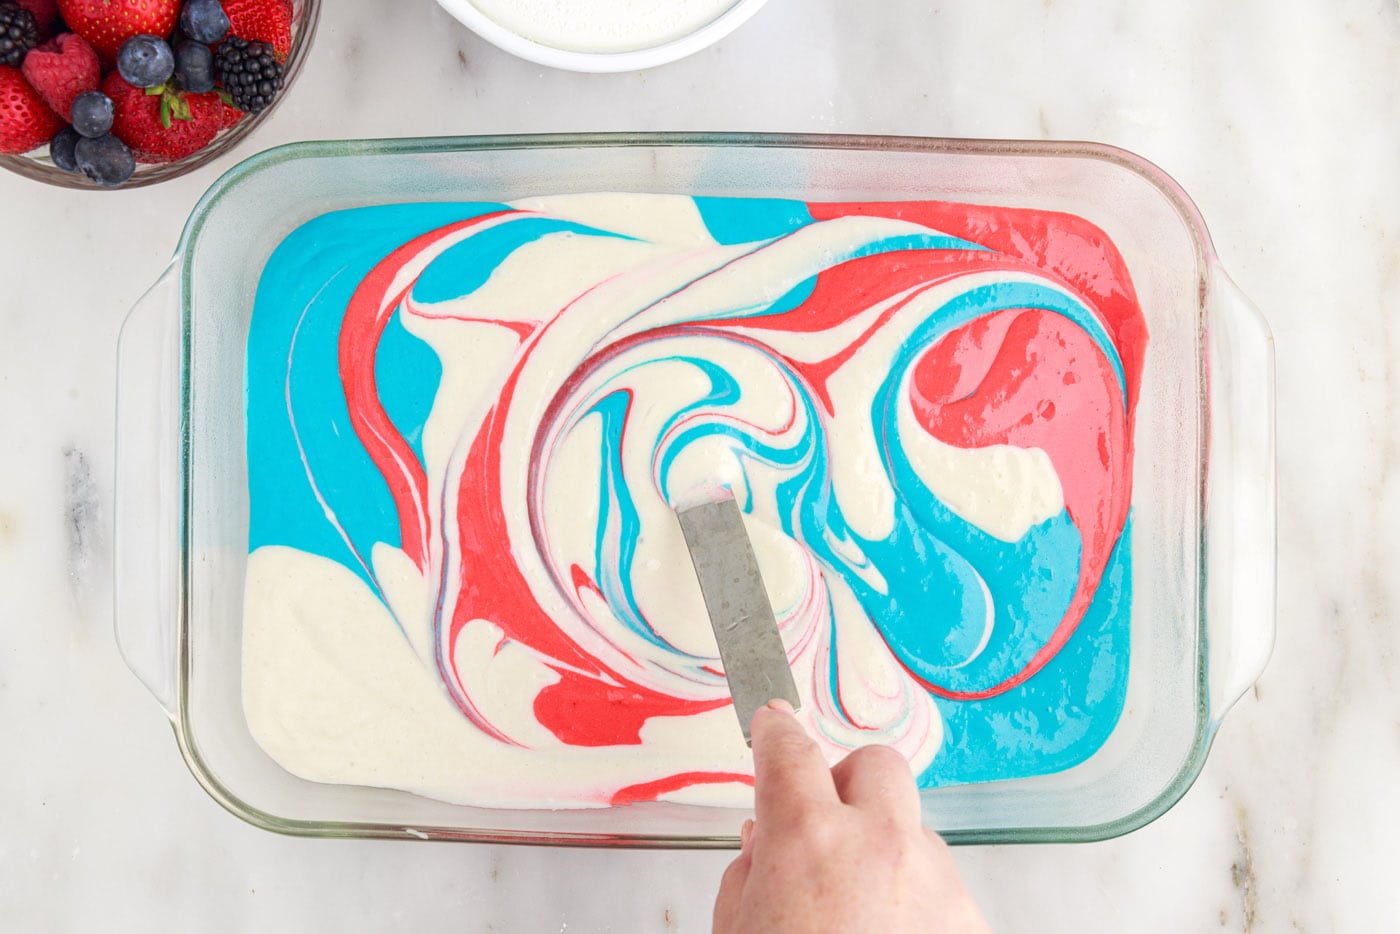 using an icing spatula to swirl cake batter colors together